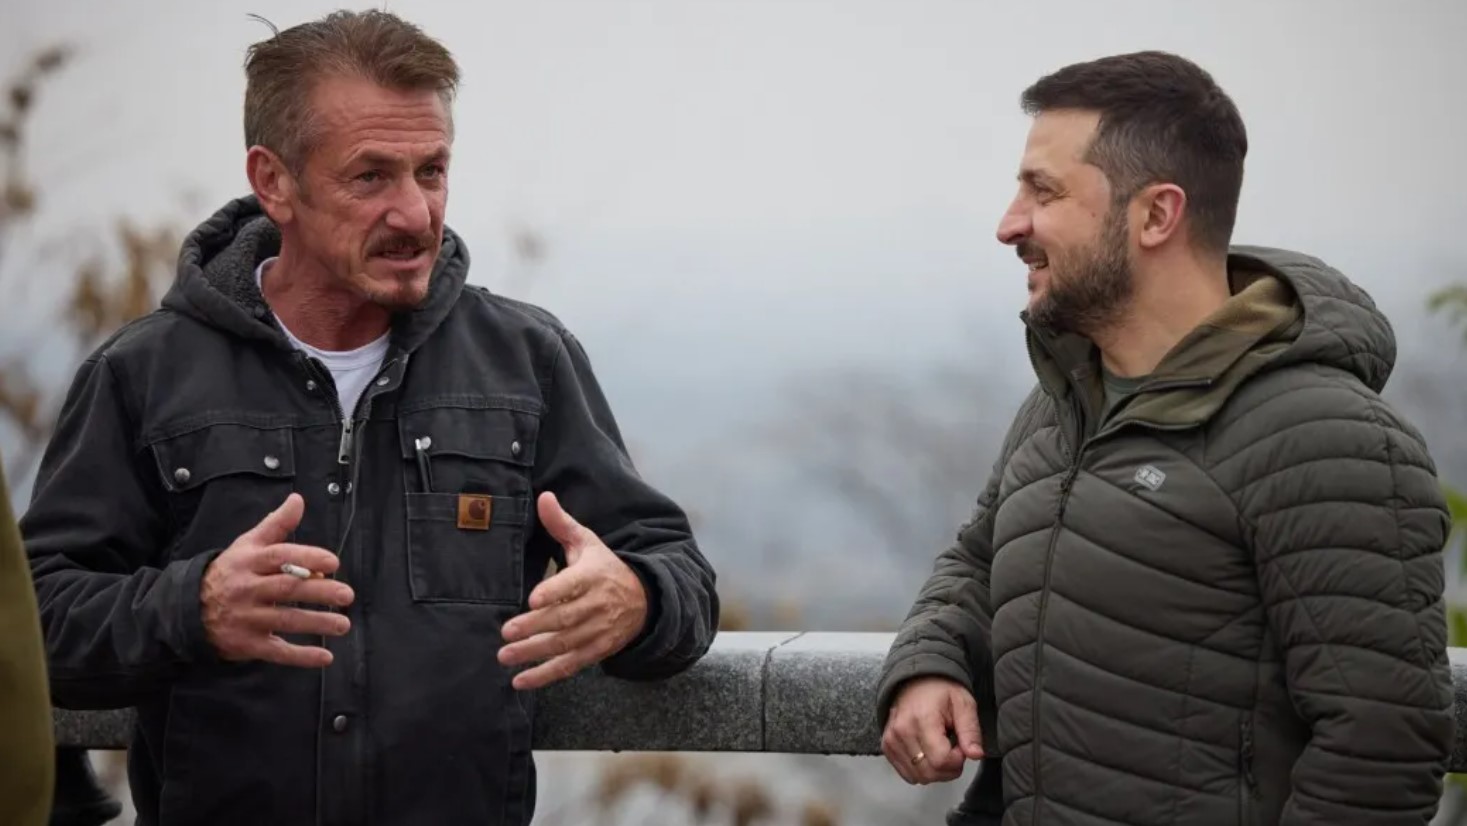 "Superpower," a documentary film by Sean Penn about Ukraine, is being released in American theaters